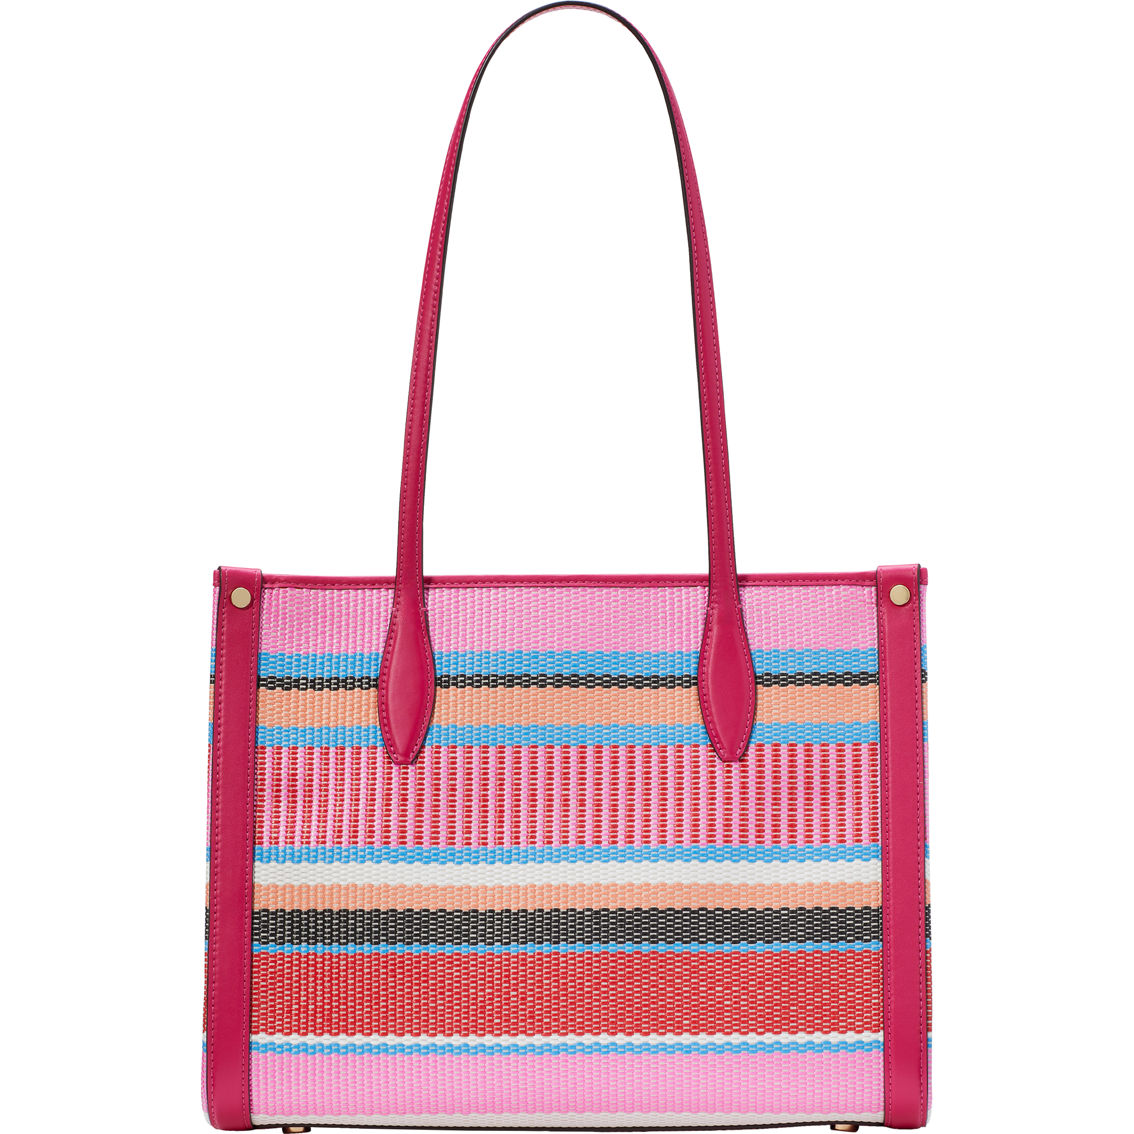 Kate Spade Market Striped Woven Straw Medium Tote - Image 2 of 5